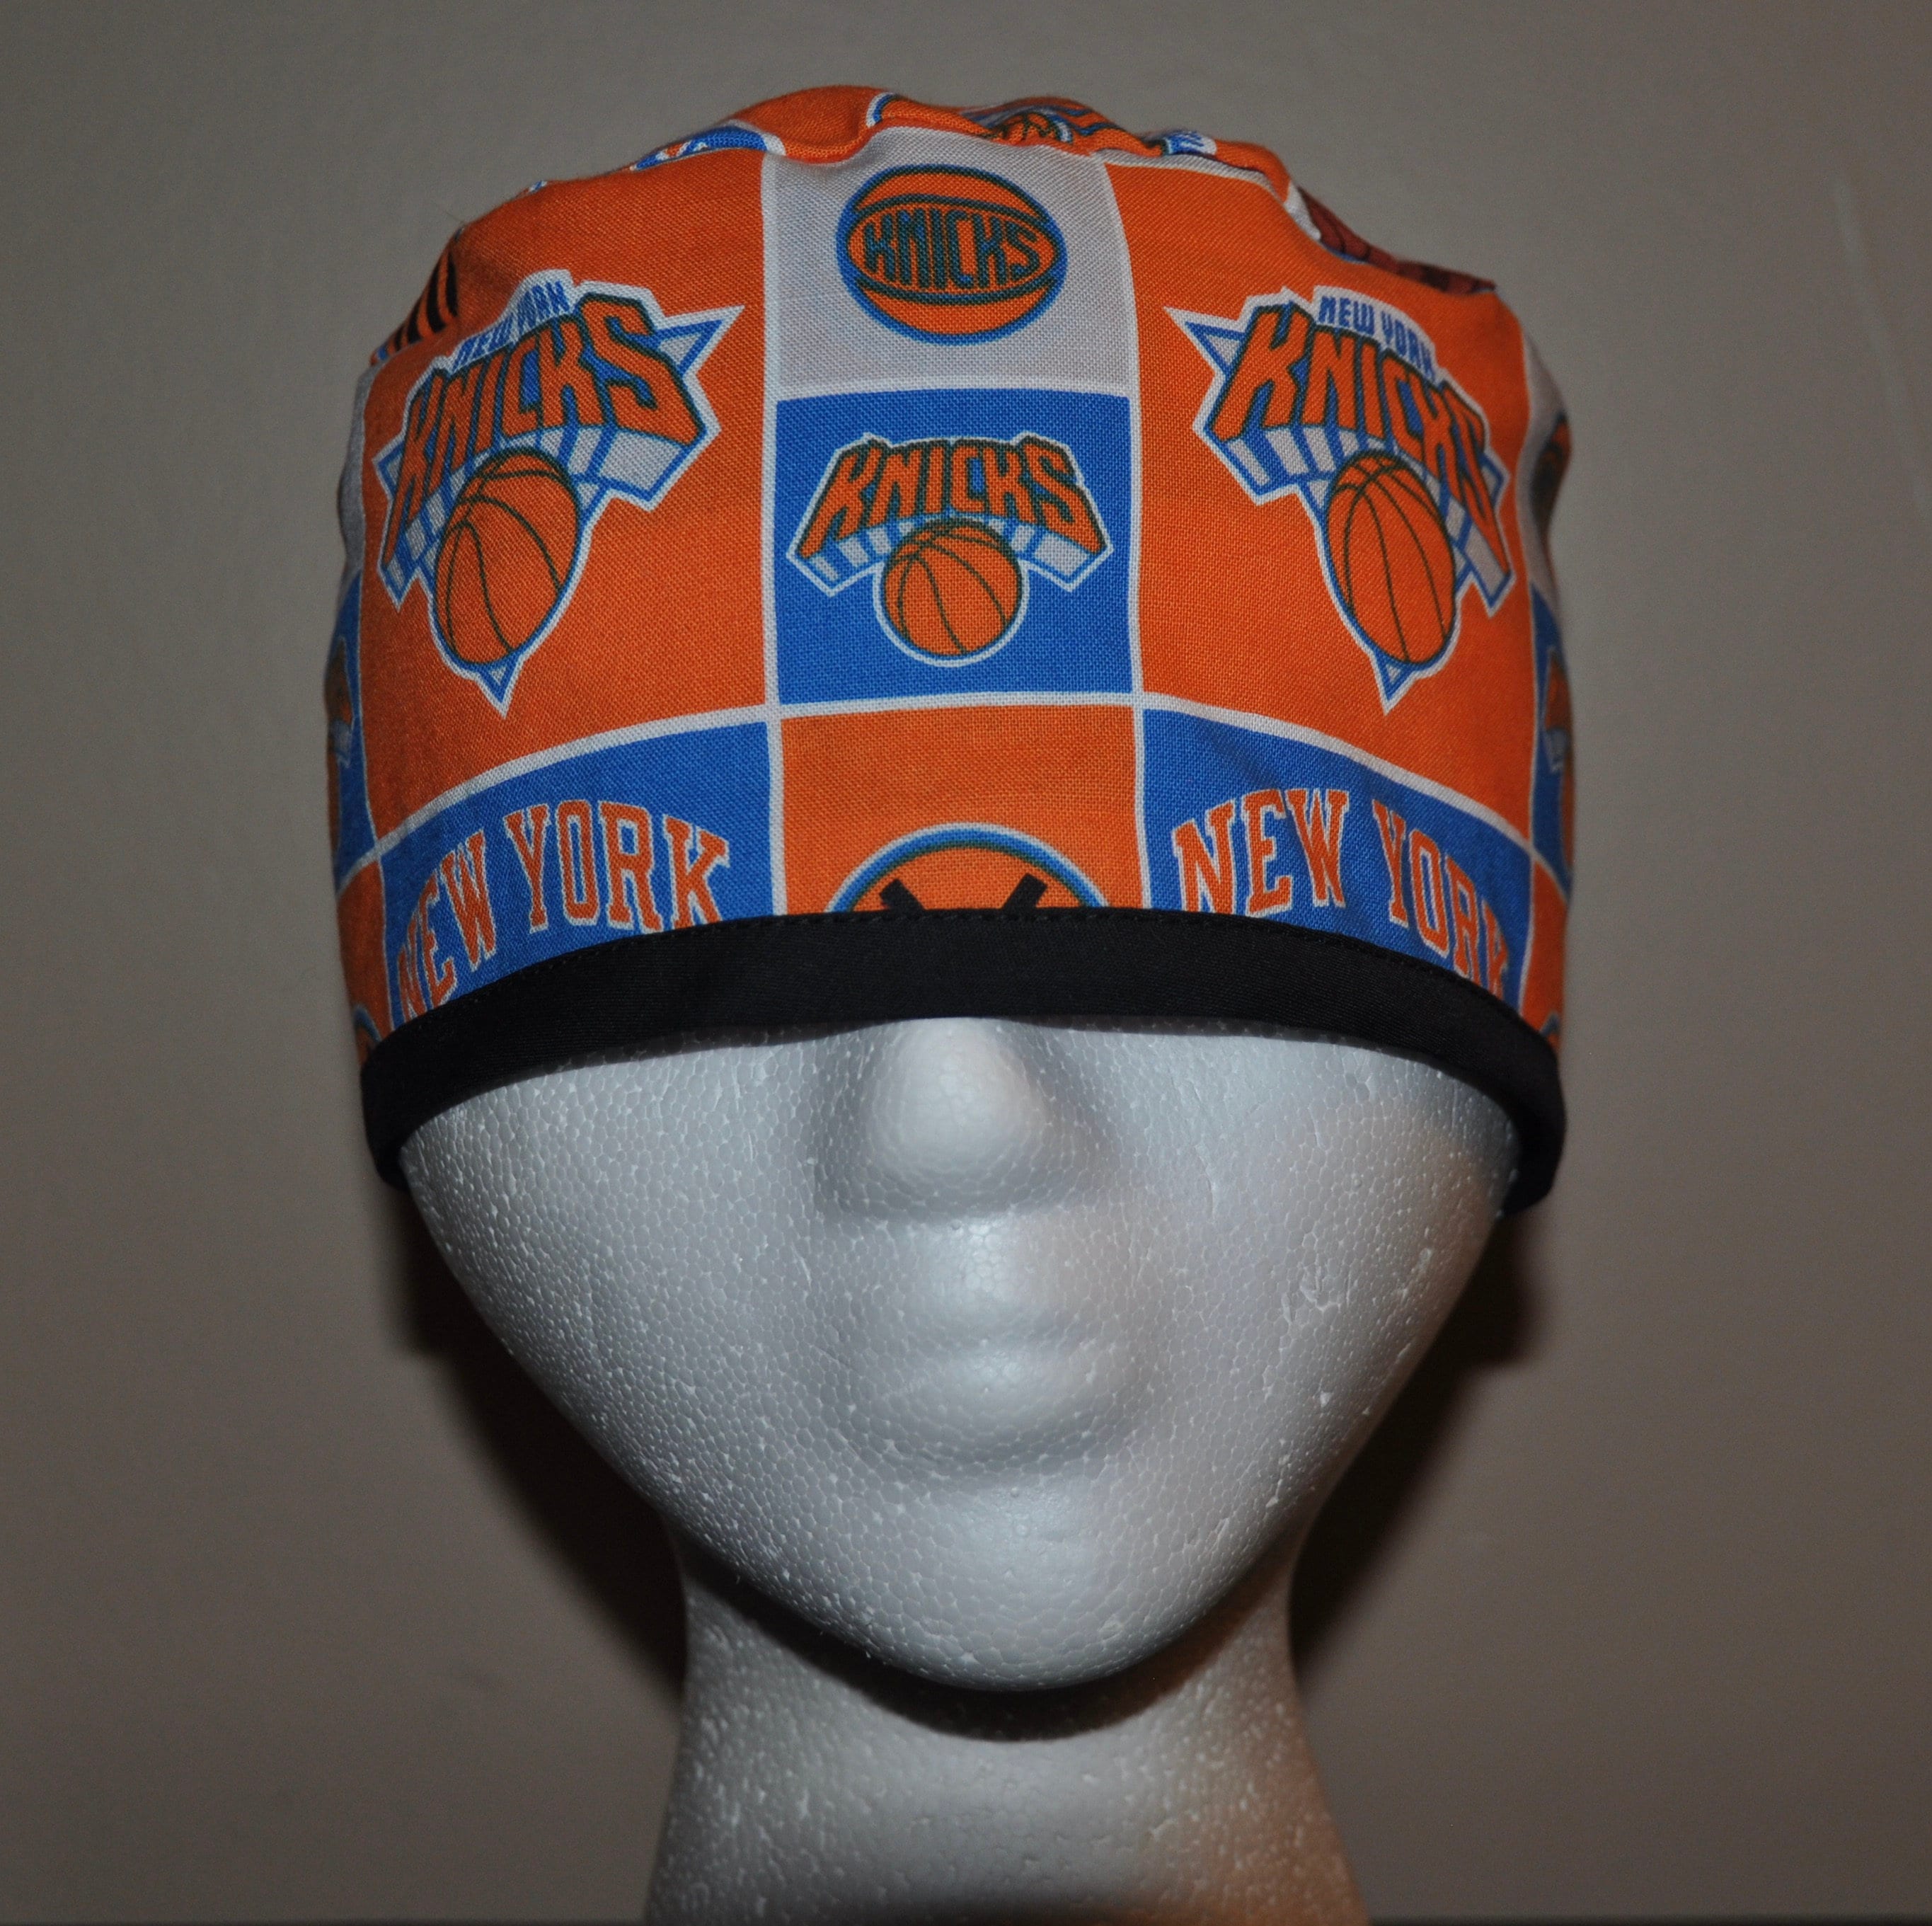 Knicks super fan gift set| Gift ideas for basketball fans — Personally  Thoughtful